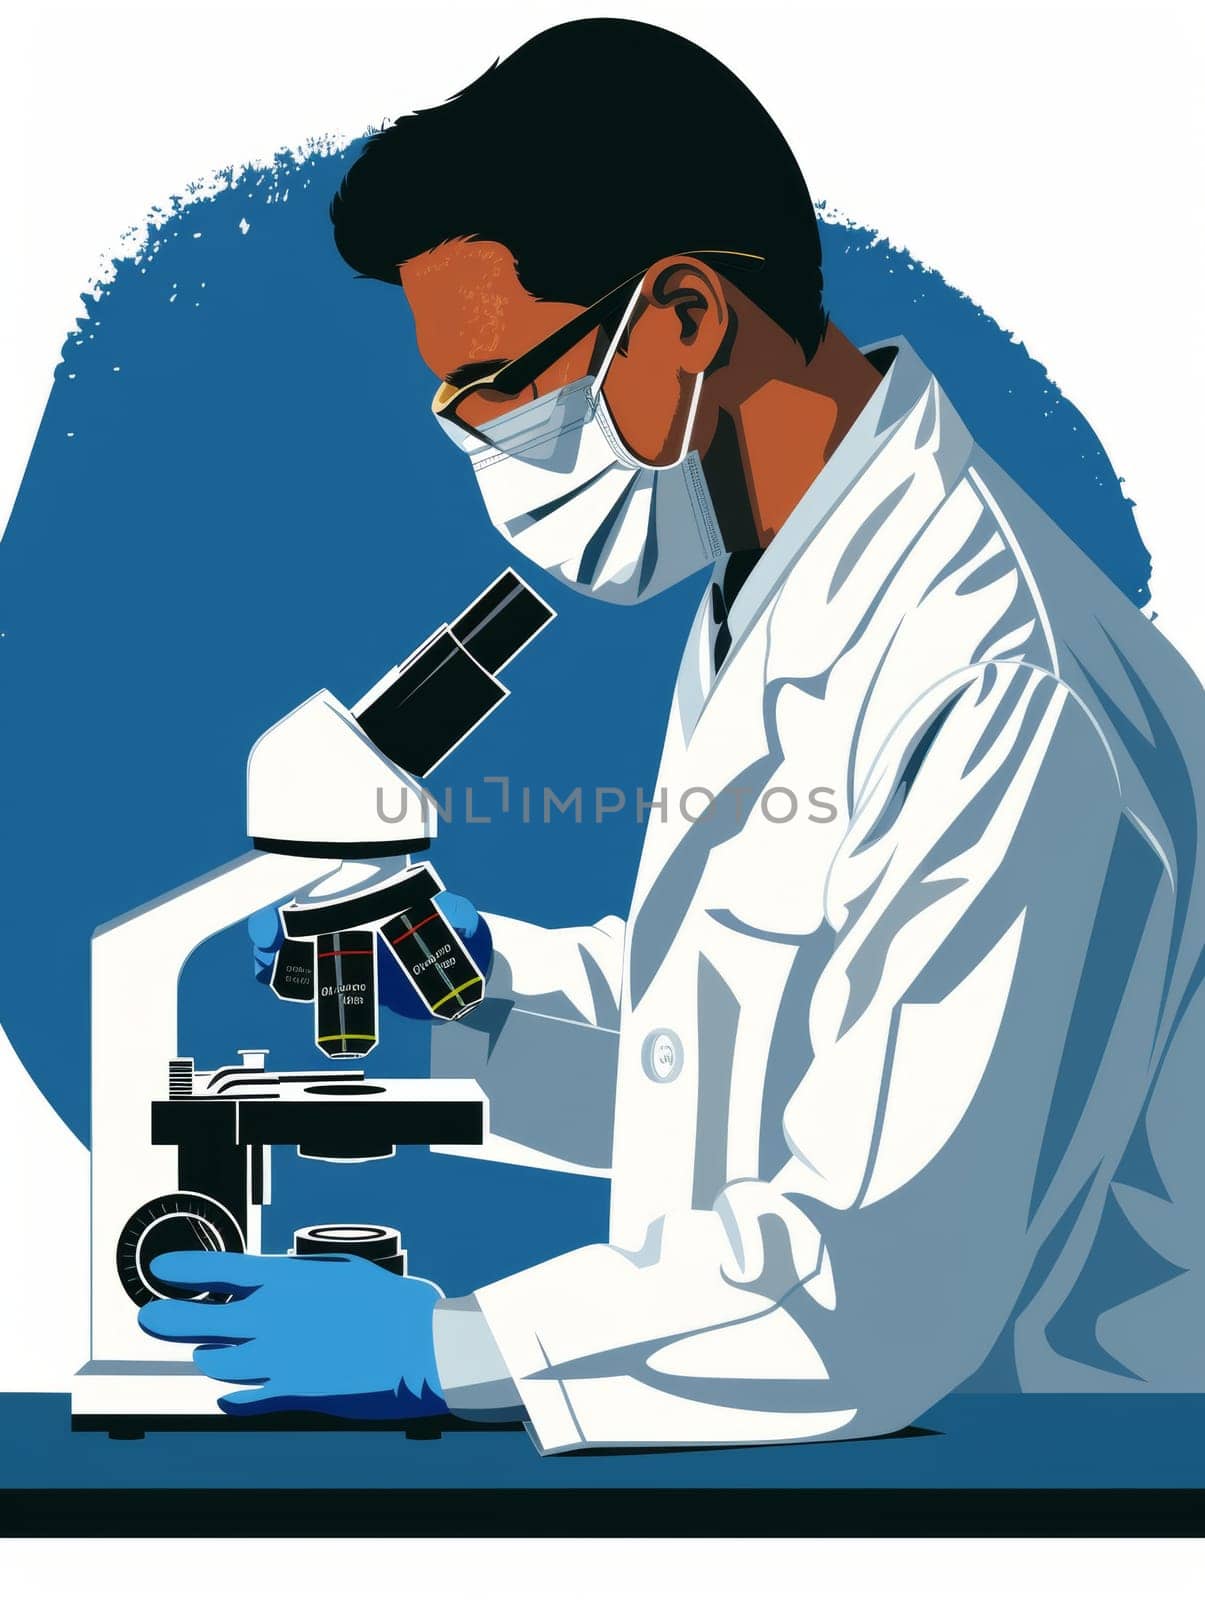 Stylized illustration of a scientist analyzing samples with a microscope. by sfinks